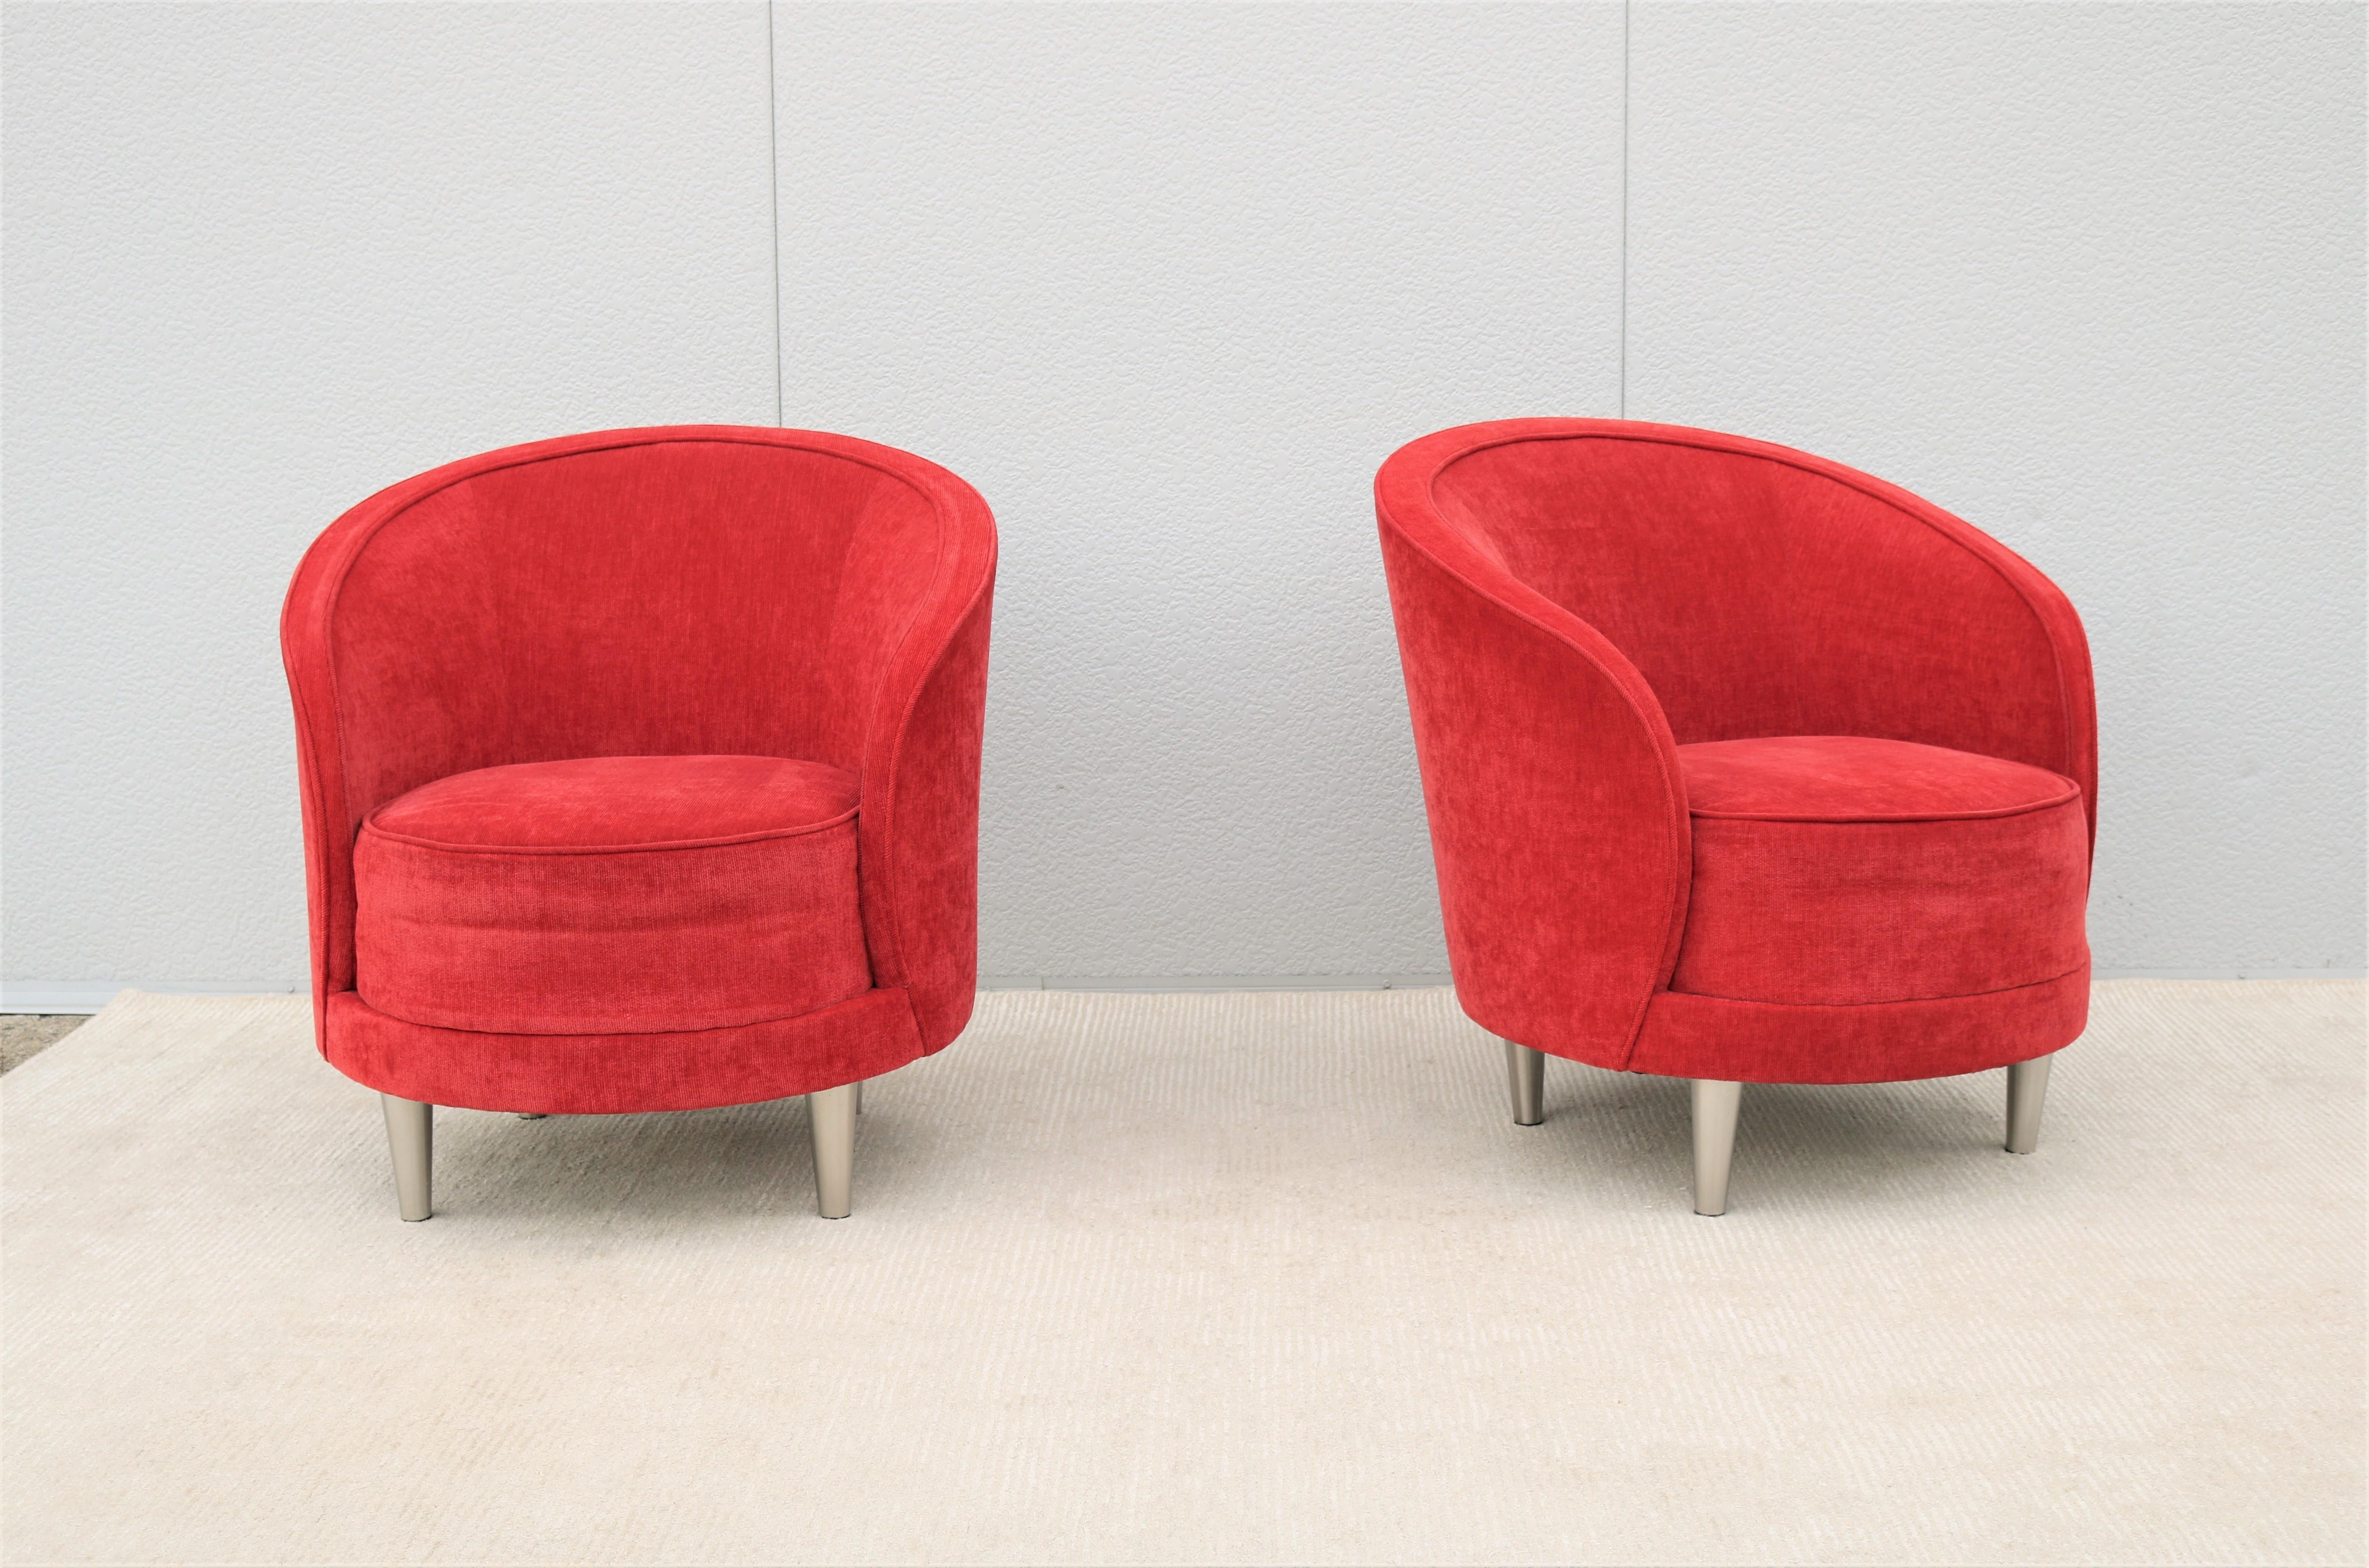 American Contemporary Modern Martin Brattrud Kinsale Red Barrel Lounge Chairs, a Pair For Sale